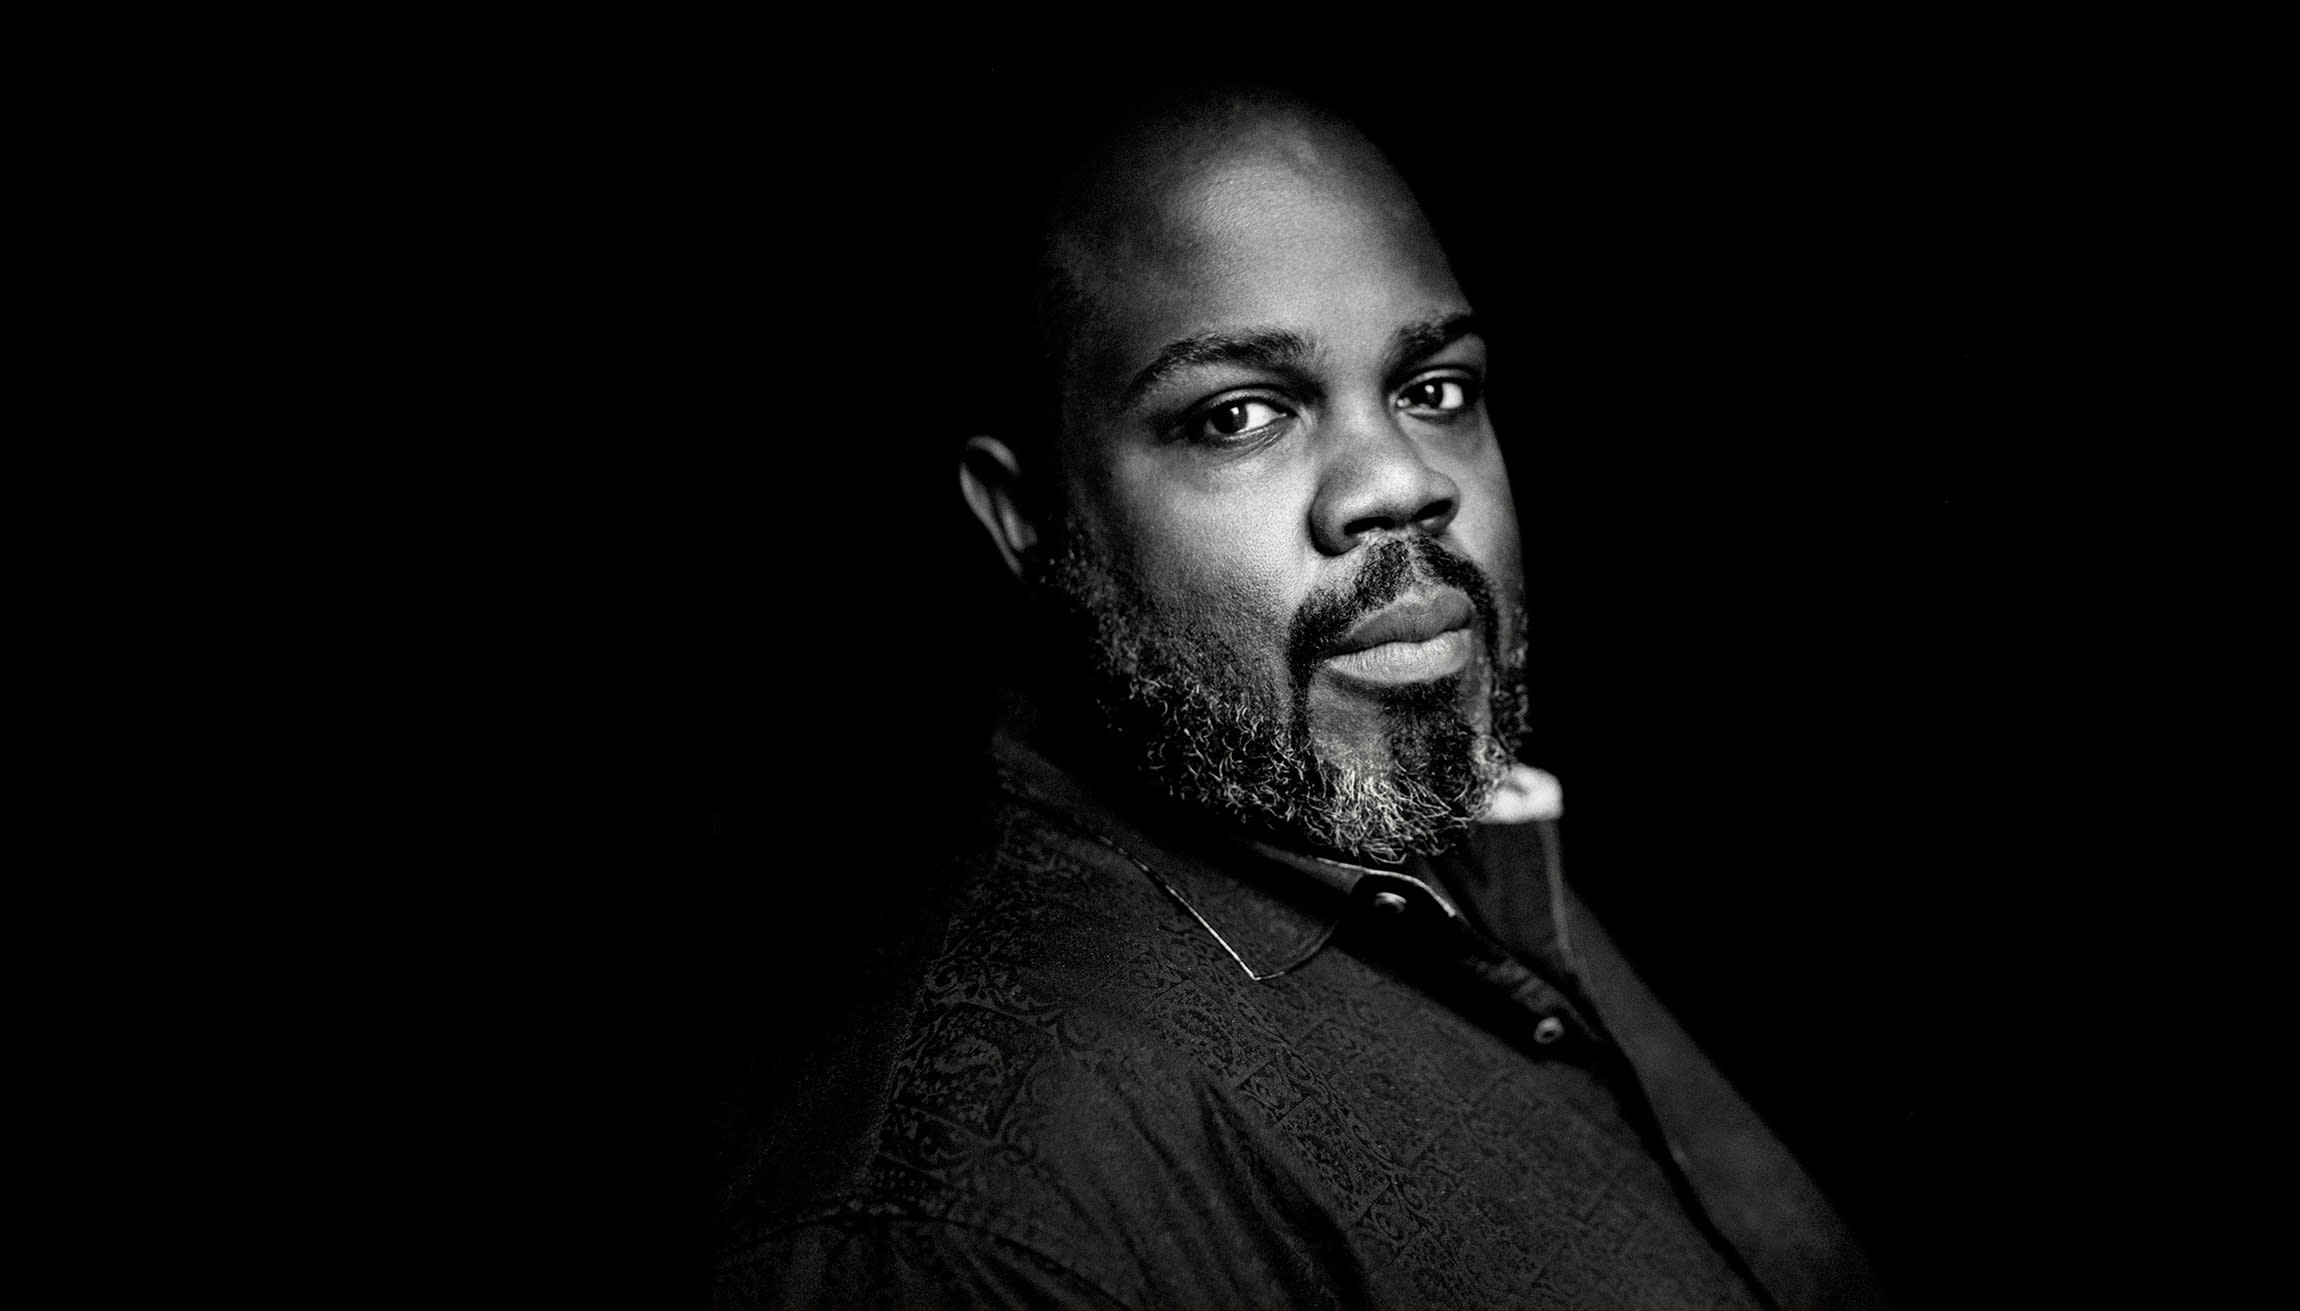 Reginald Mobley: Countertenor - on his voice, his patron spirit and being seen